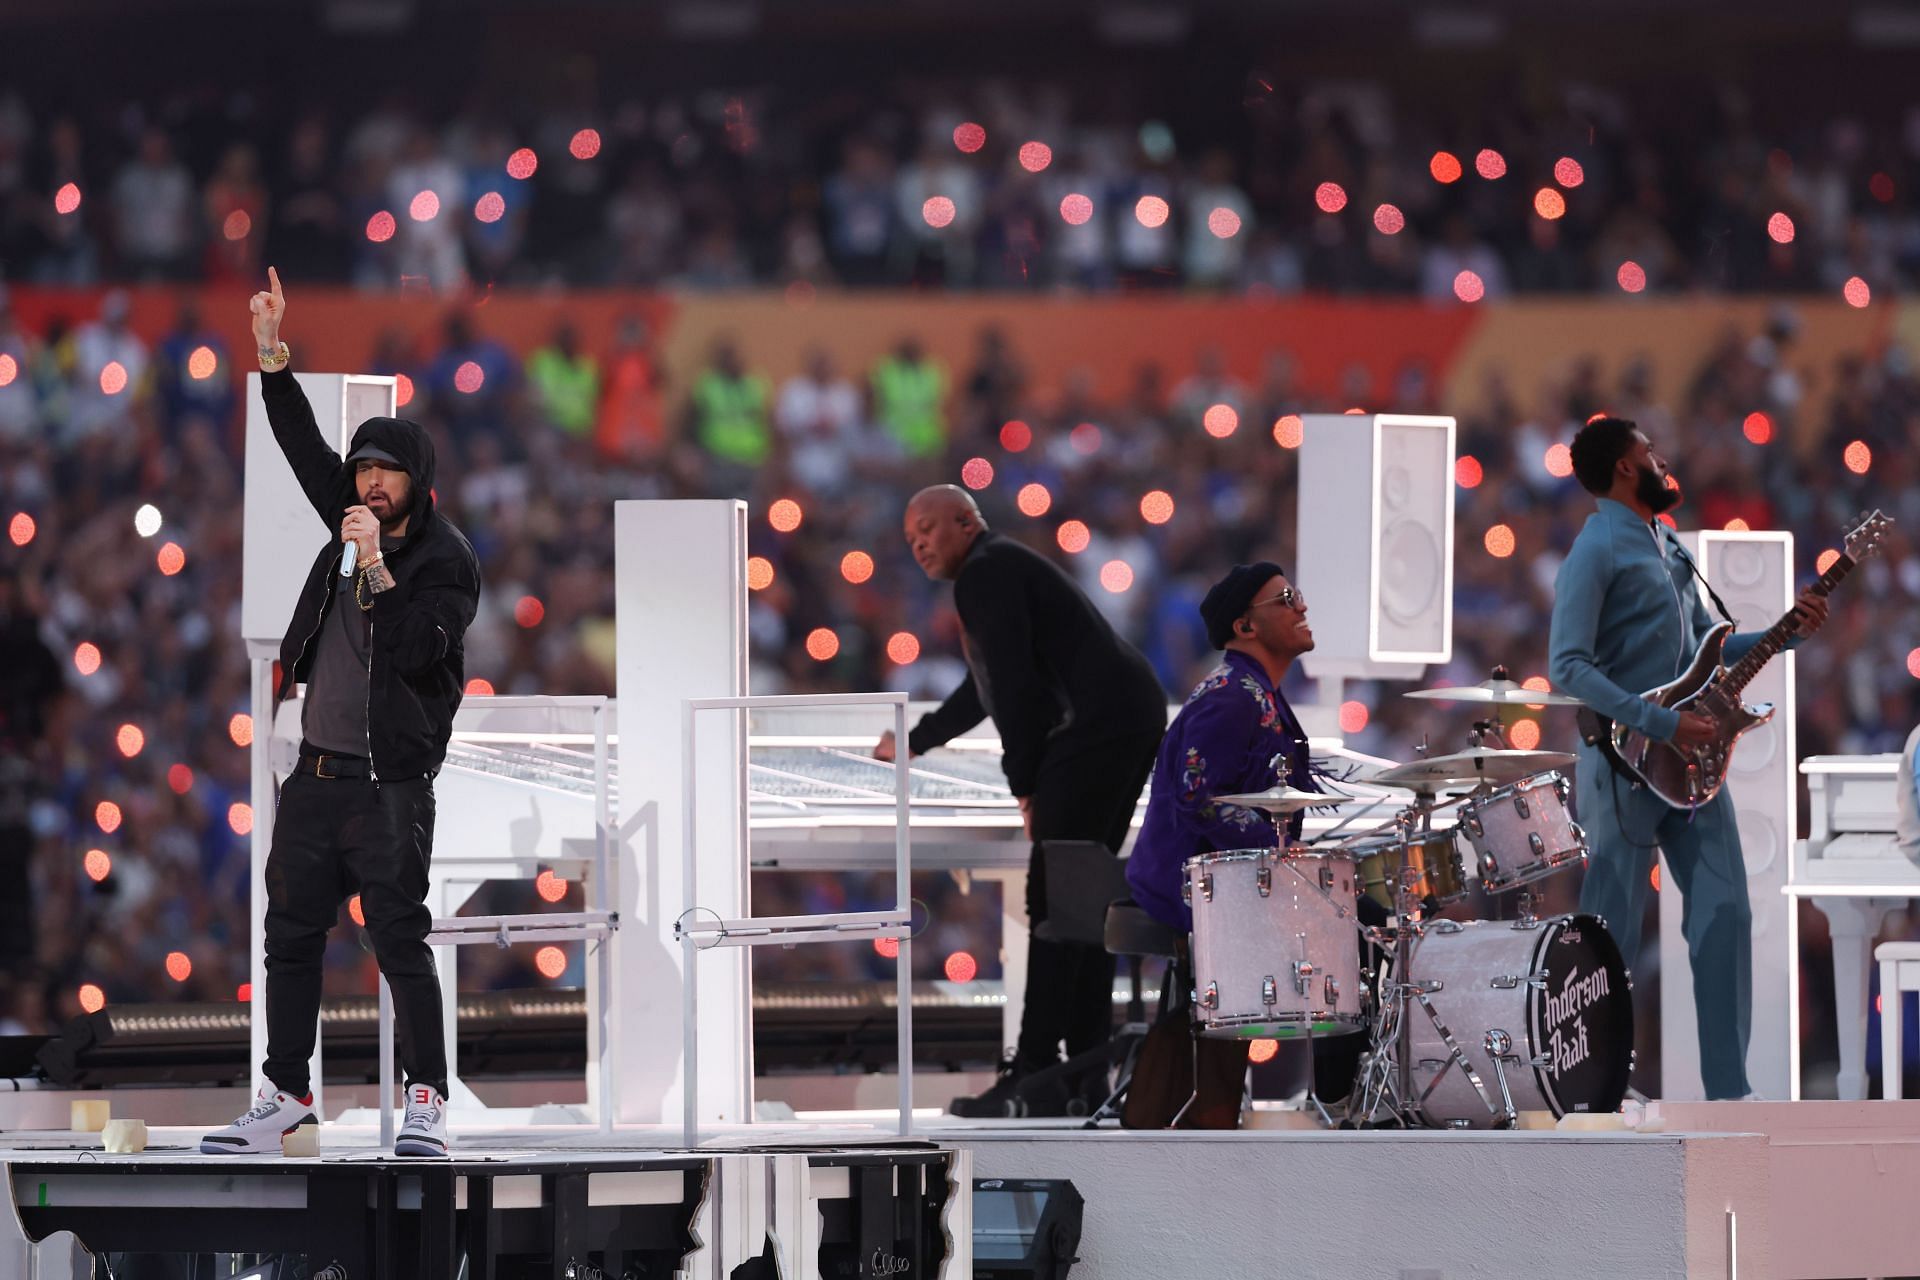 Super Bowl: Dr Dre and Eminem pack in the hits at half-time show